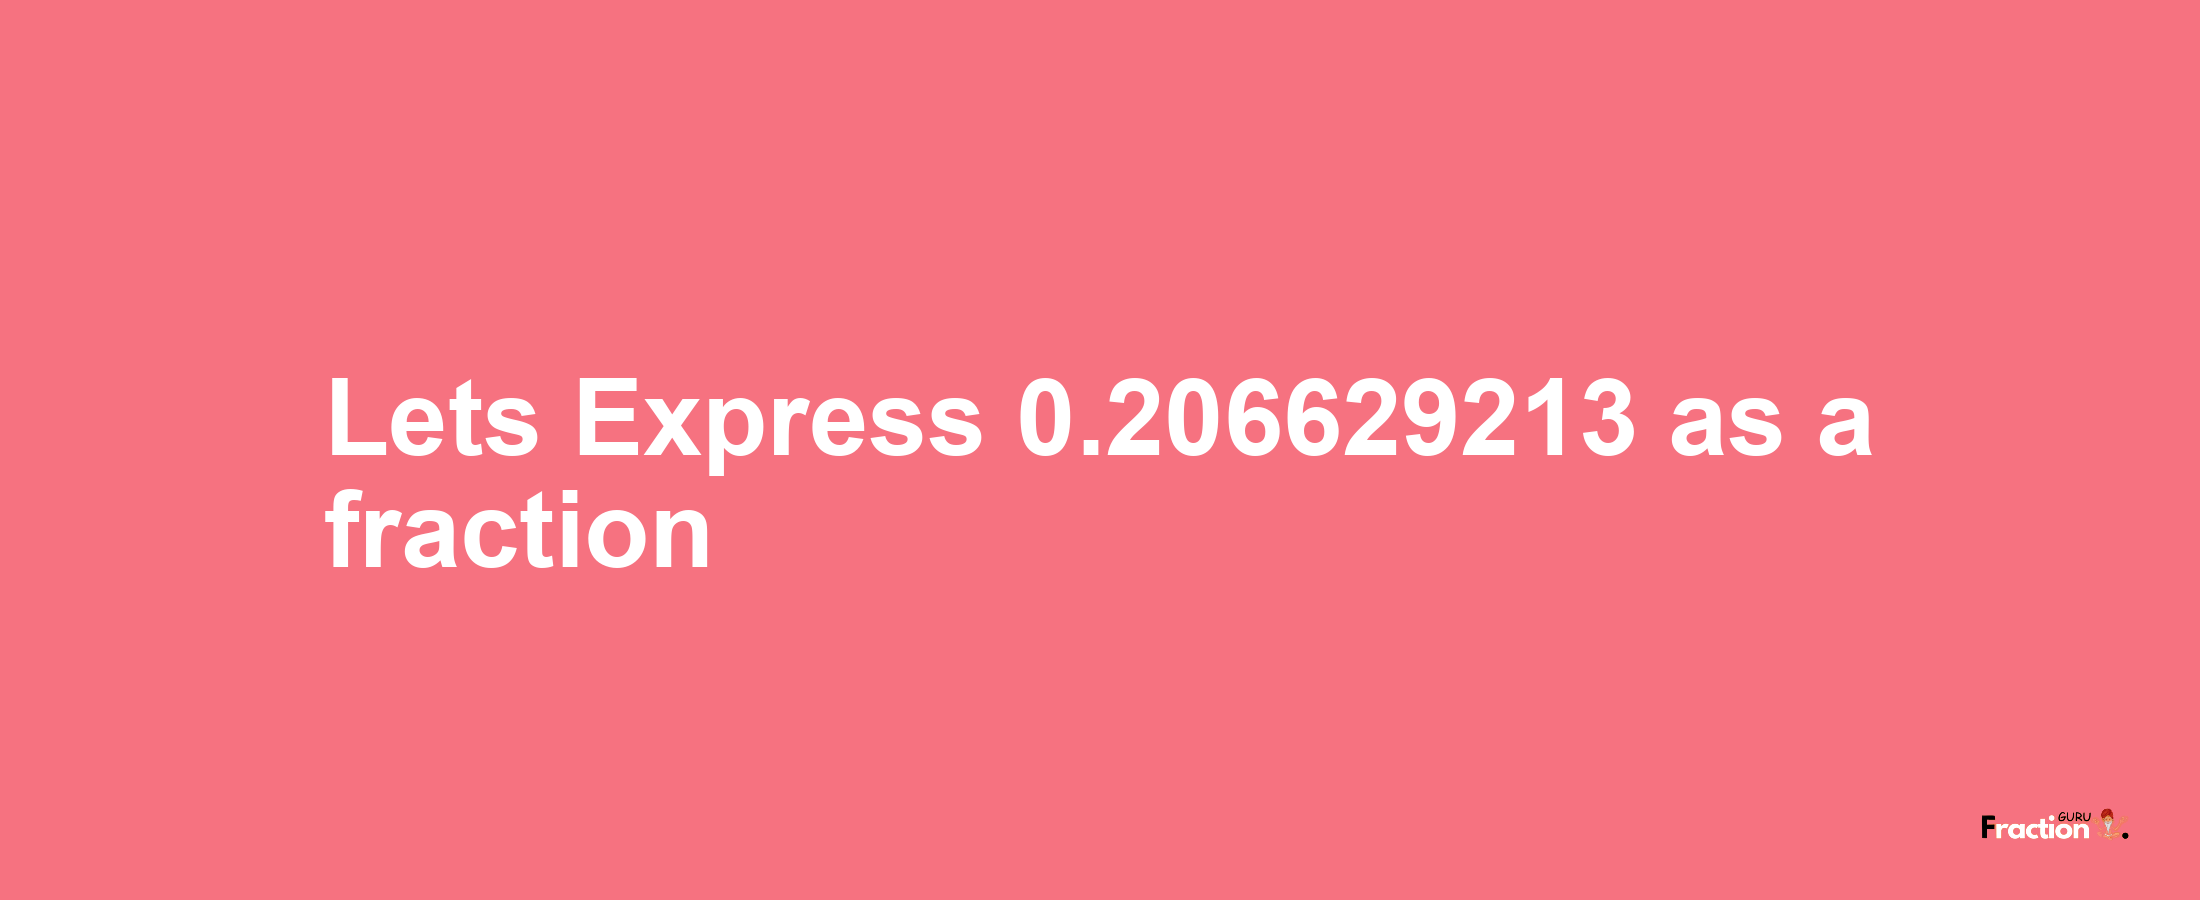 Lets Express 0.206629213 as afraction